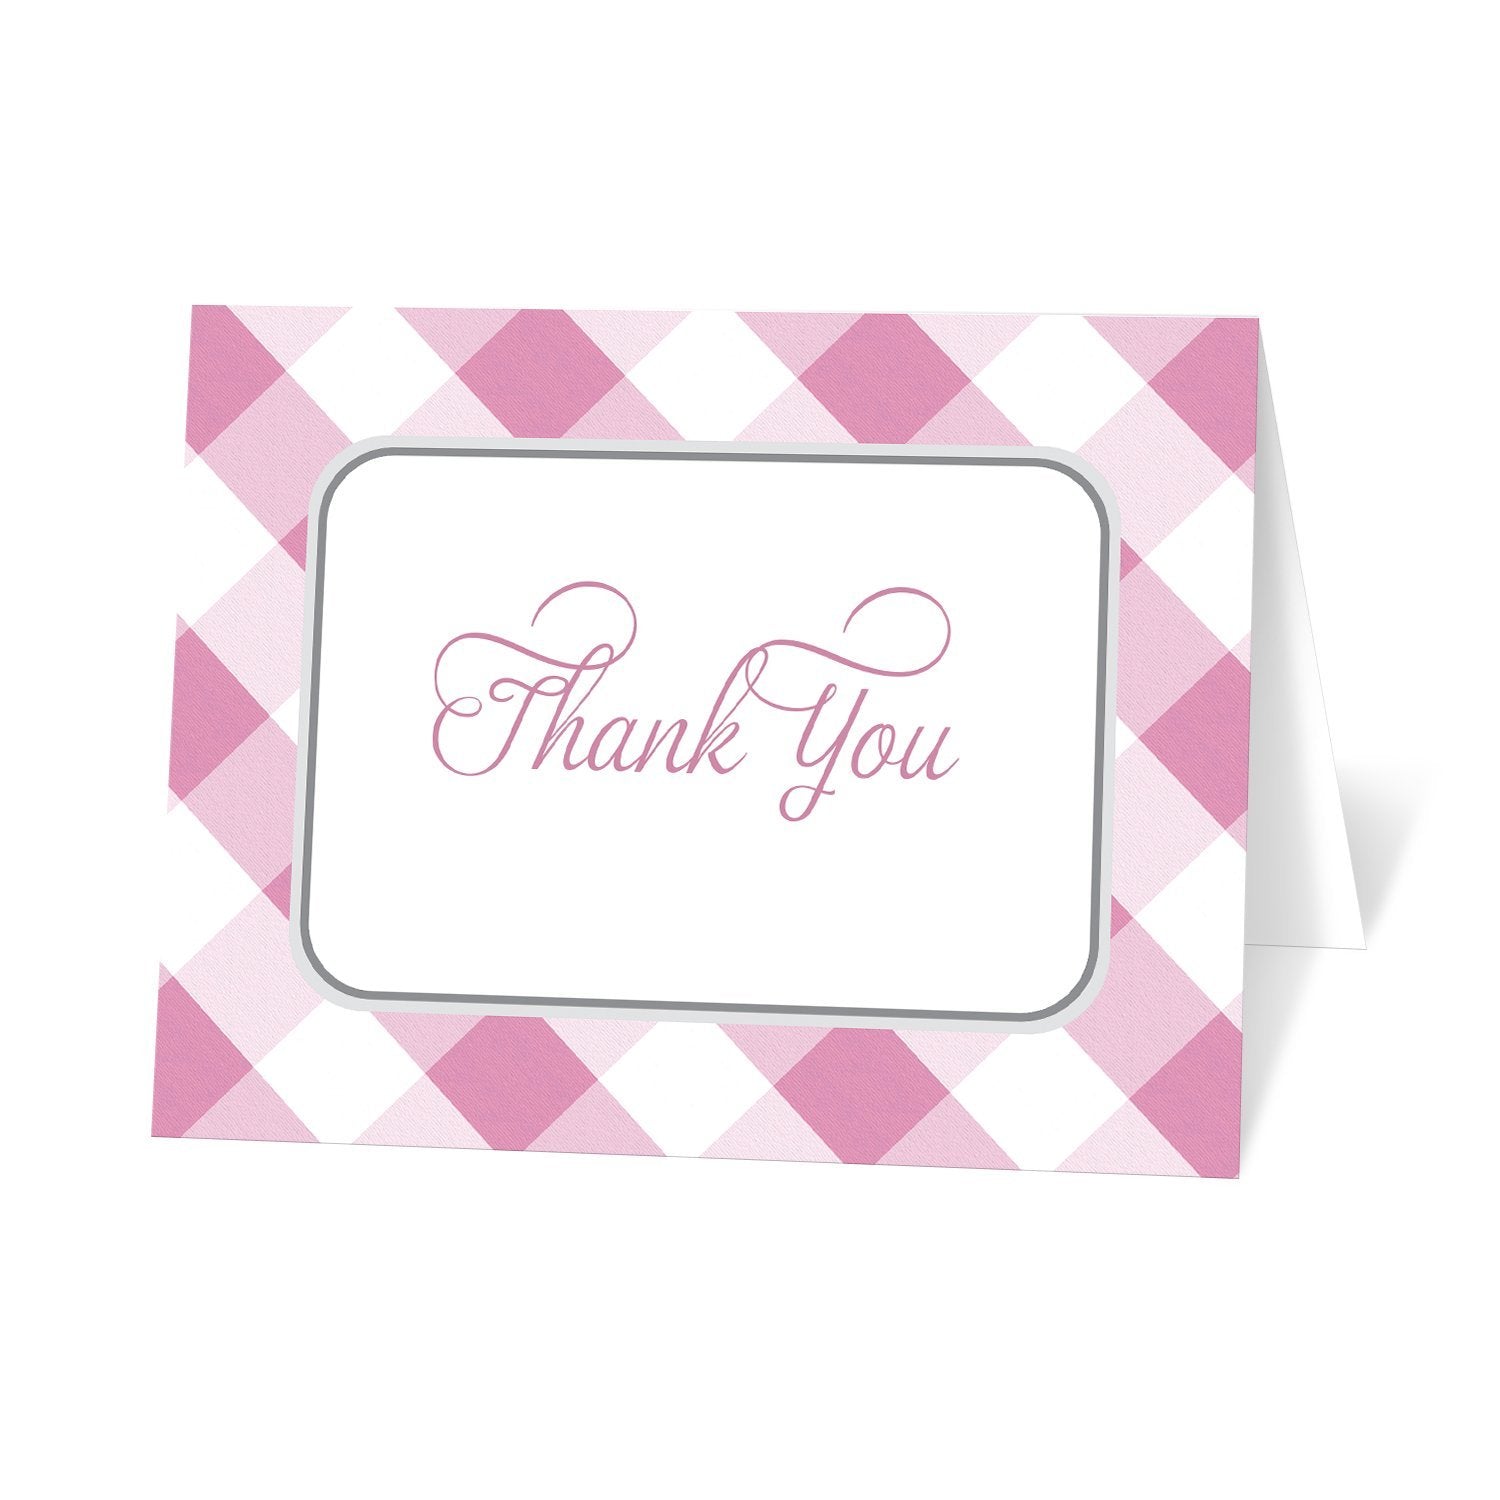 Pink Gingham Thank You Cards at Artistically Invited